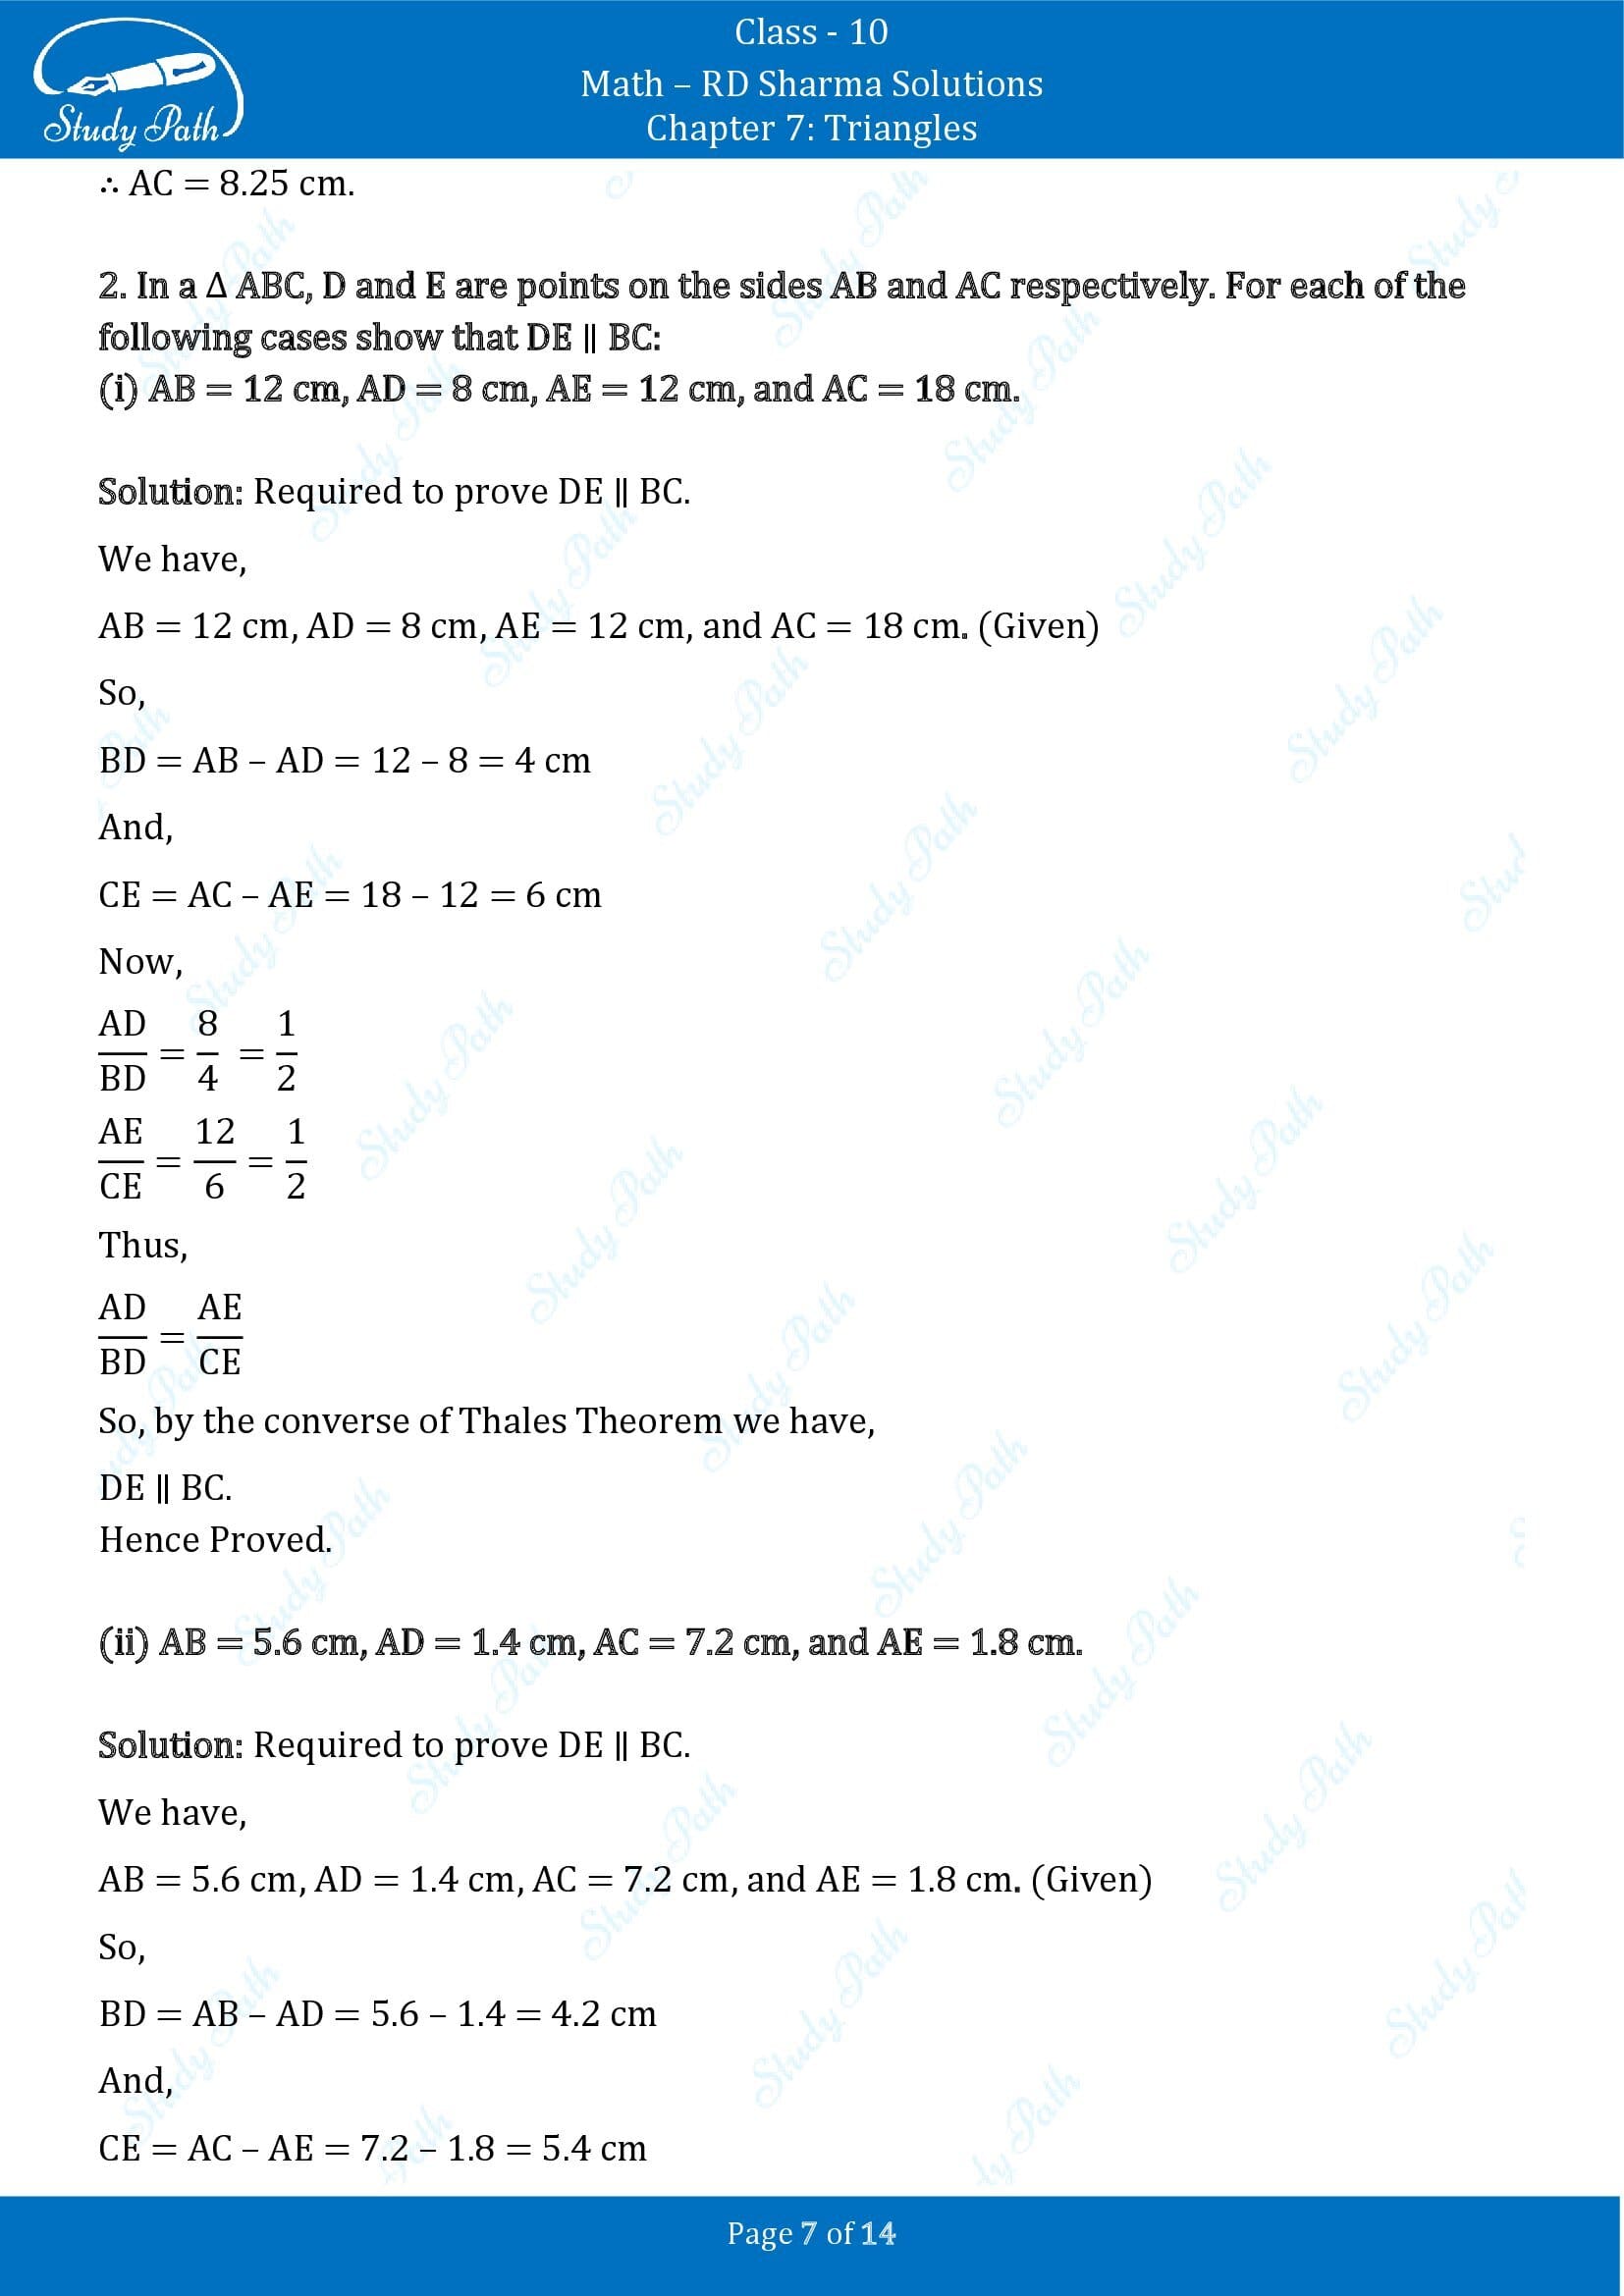 RD Sharma Solutions Class 10 Chapter 7 Triangles Exercise 7.2 00007